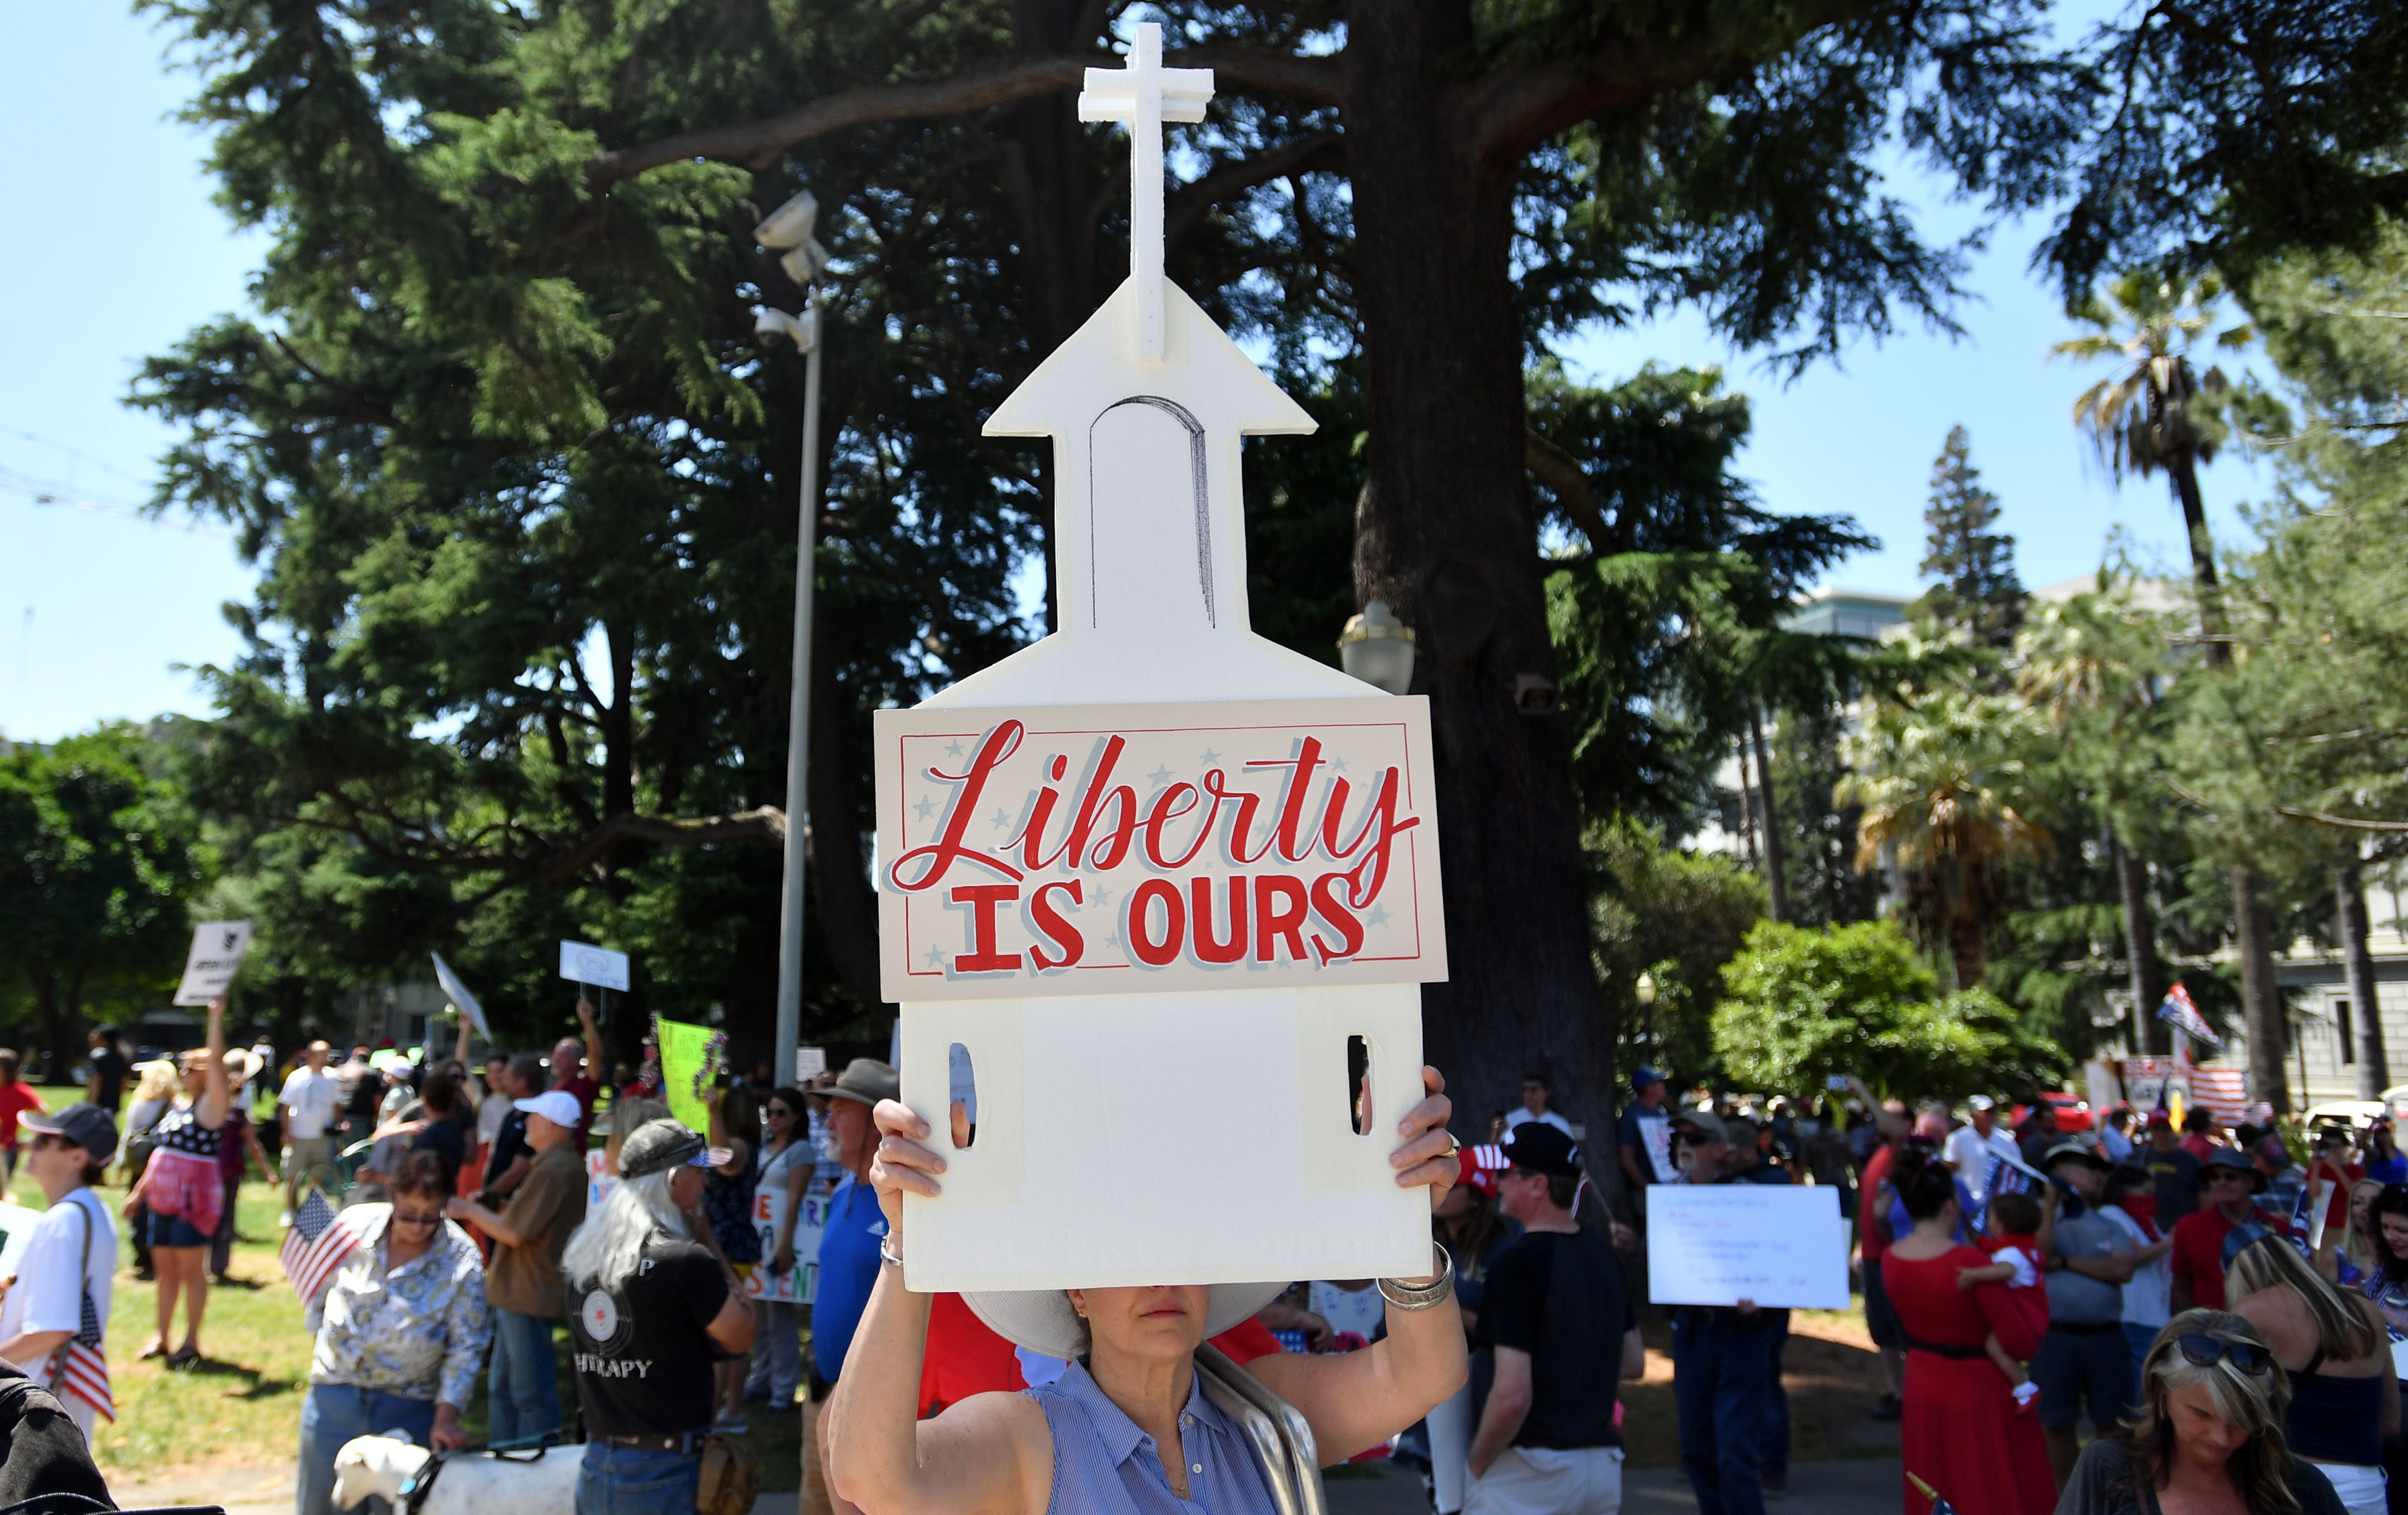 A woman holds up a sign depicting a church as hundreds of people gather to protest the stay-at-home orders outside the state capitol building in Sacramento, California on May 01, 2020. (Photo by JOSH EDELSON/AFP via Getty Images)